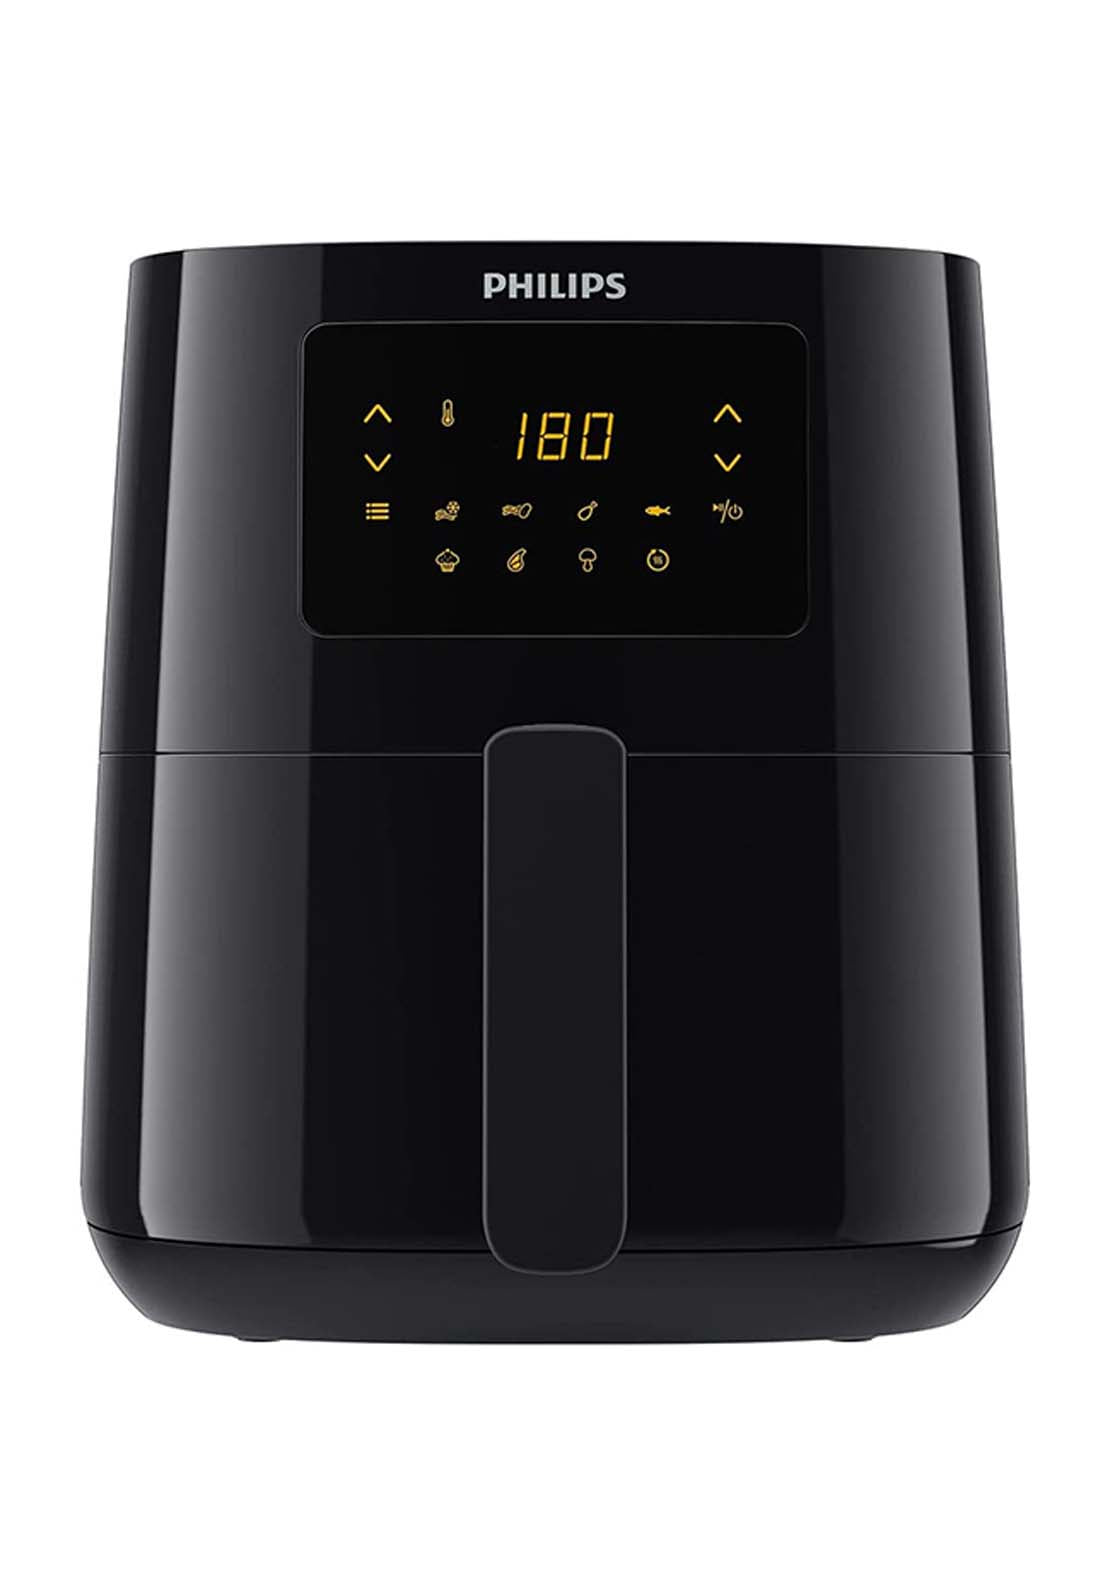 Philips 3000S Air Fryer 4L | Hd925291 1 Shaws Department Stores